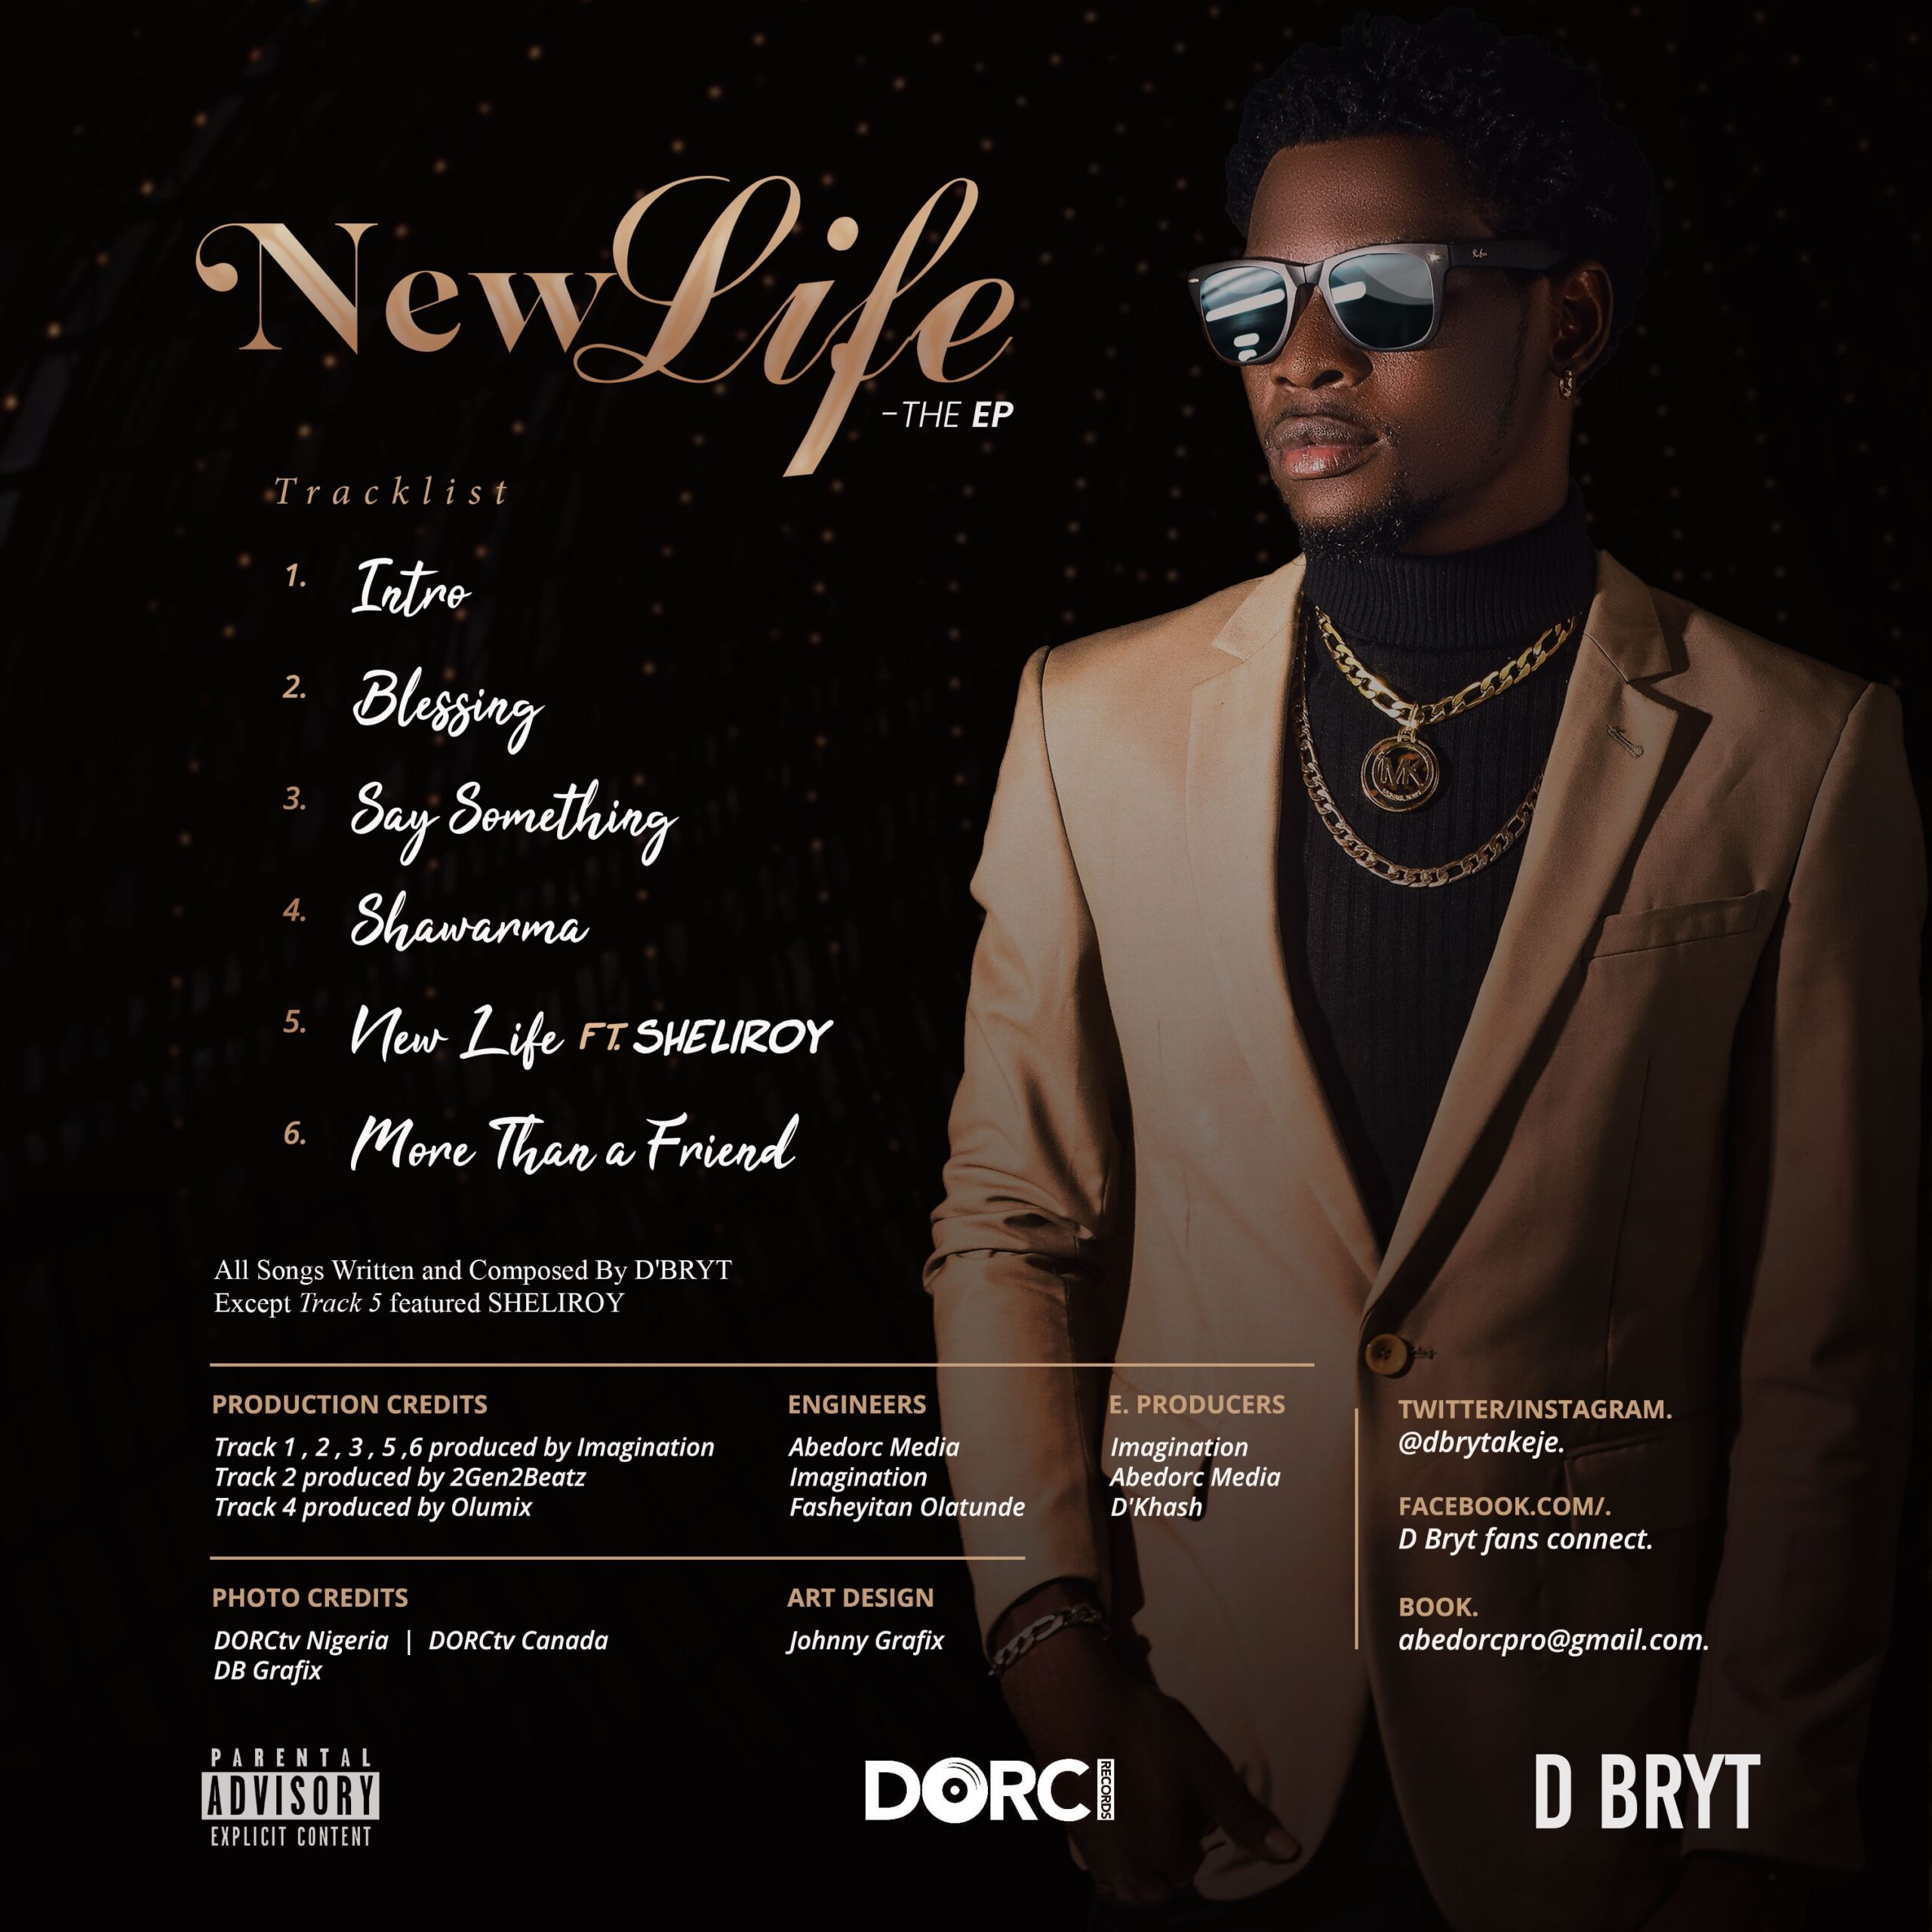 D Bryt - New Life EP tracklists